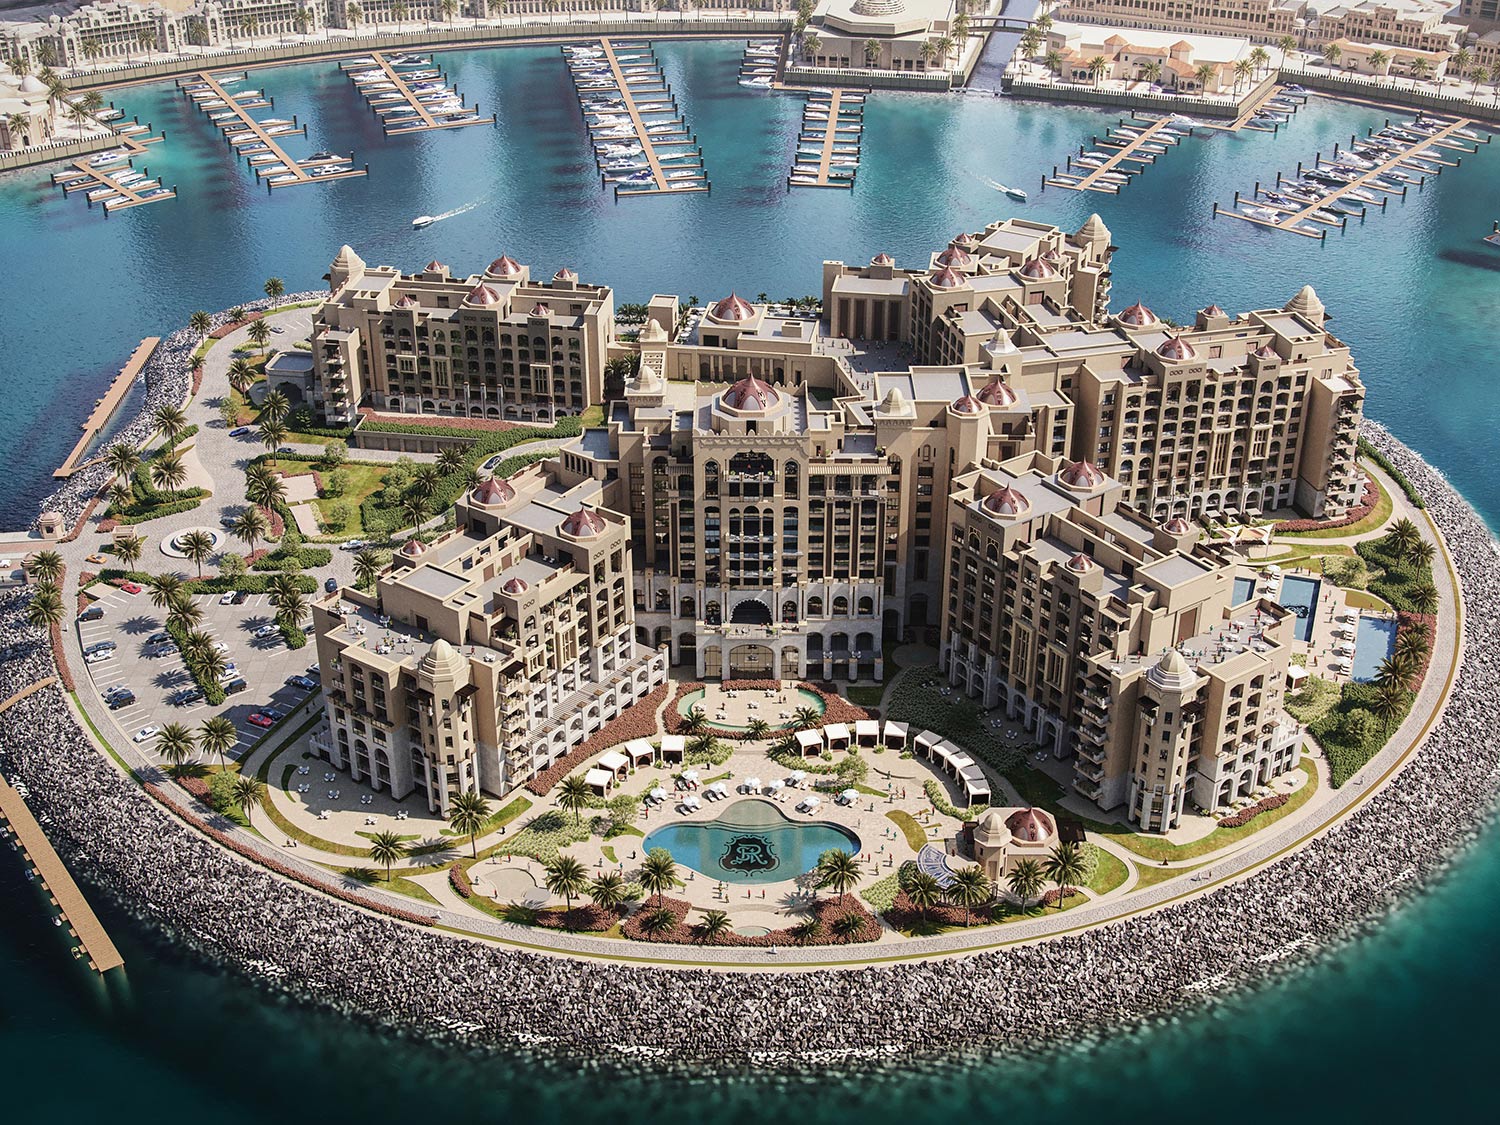 ST. REGIS HOTELS & RESORTS UNVEILS A NEW EXCLUSIVE ISLAND GETAWAY IN THE HEART OF PORTO ARABIA, THE PEARL – QATAR